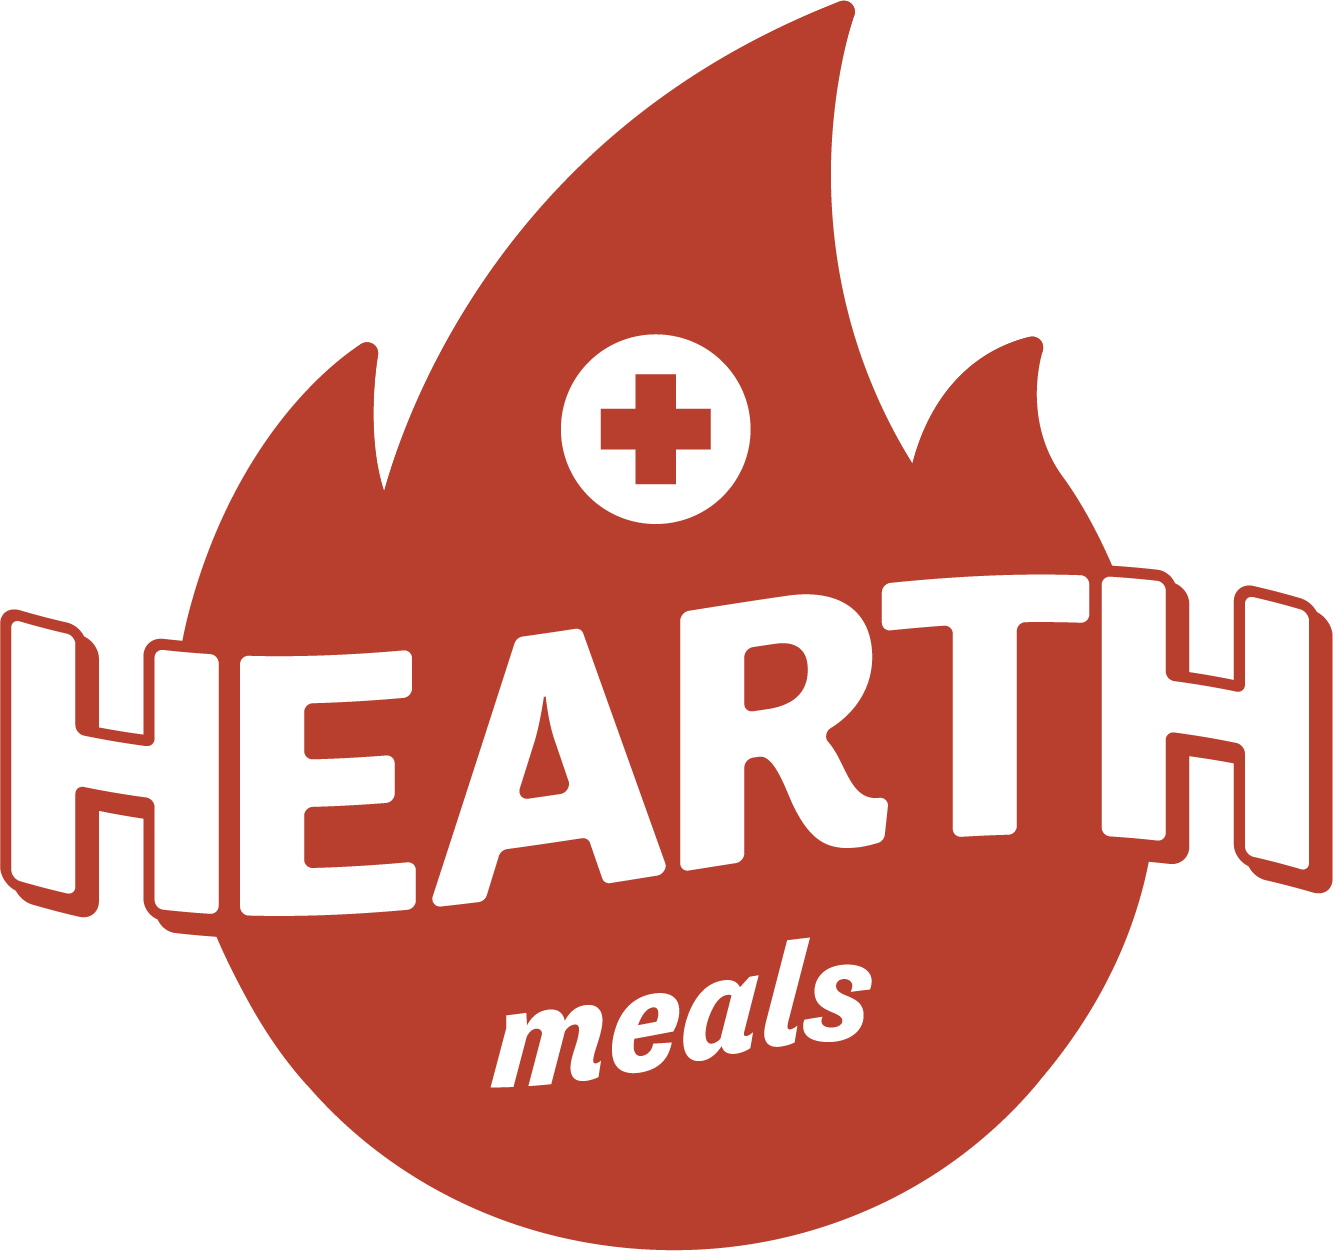 Hearth Meals